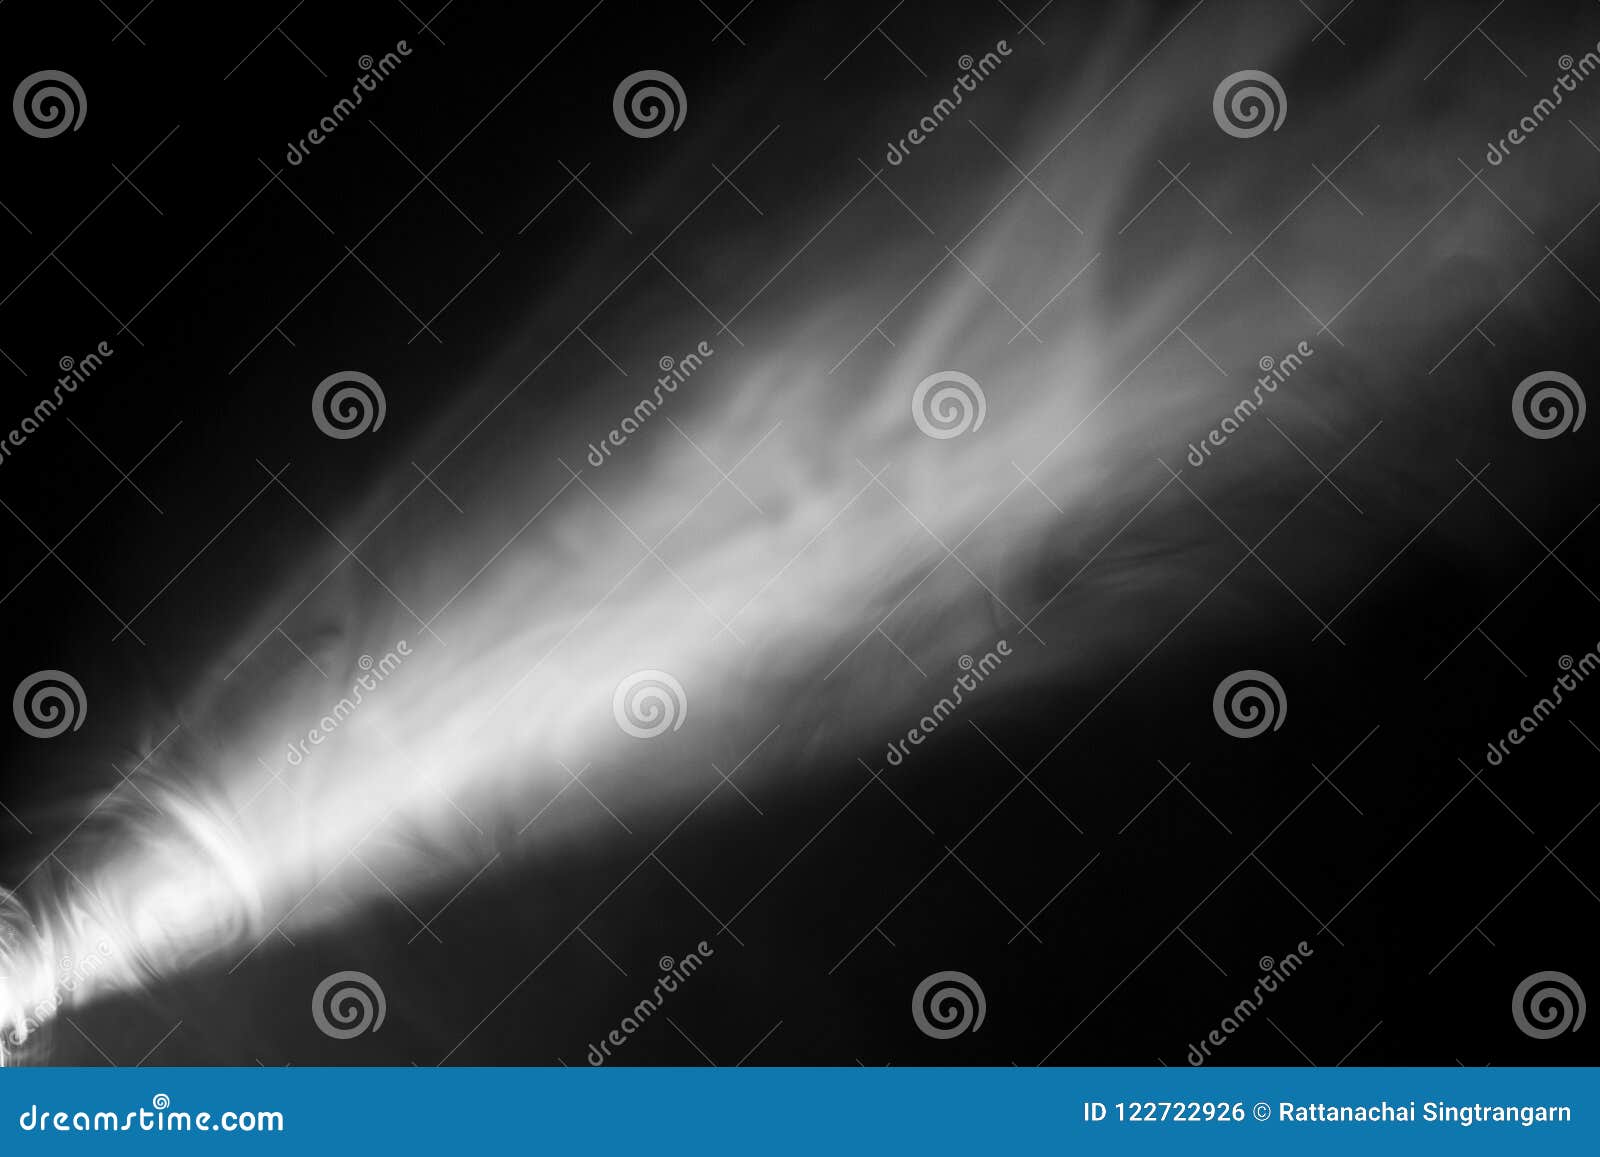 Wide Lens Projector with Light Beam Texture Spotlight ,abstract Background . Stock Photo - of education: 122722926